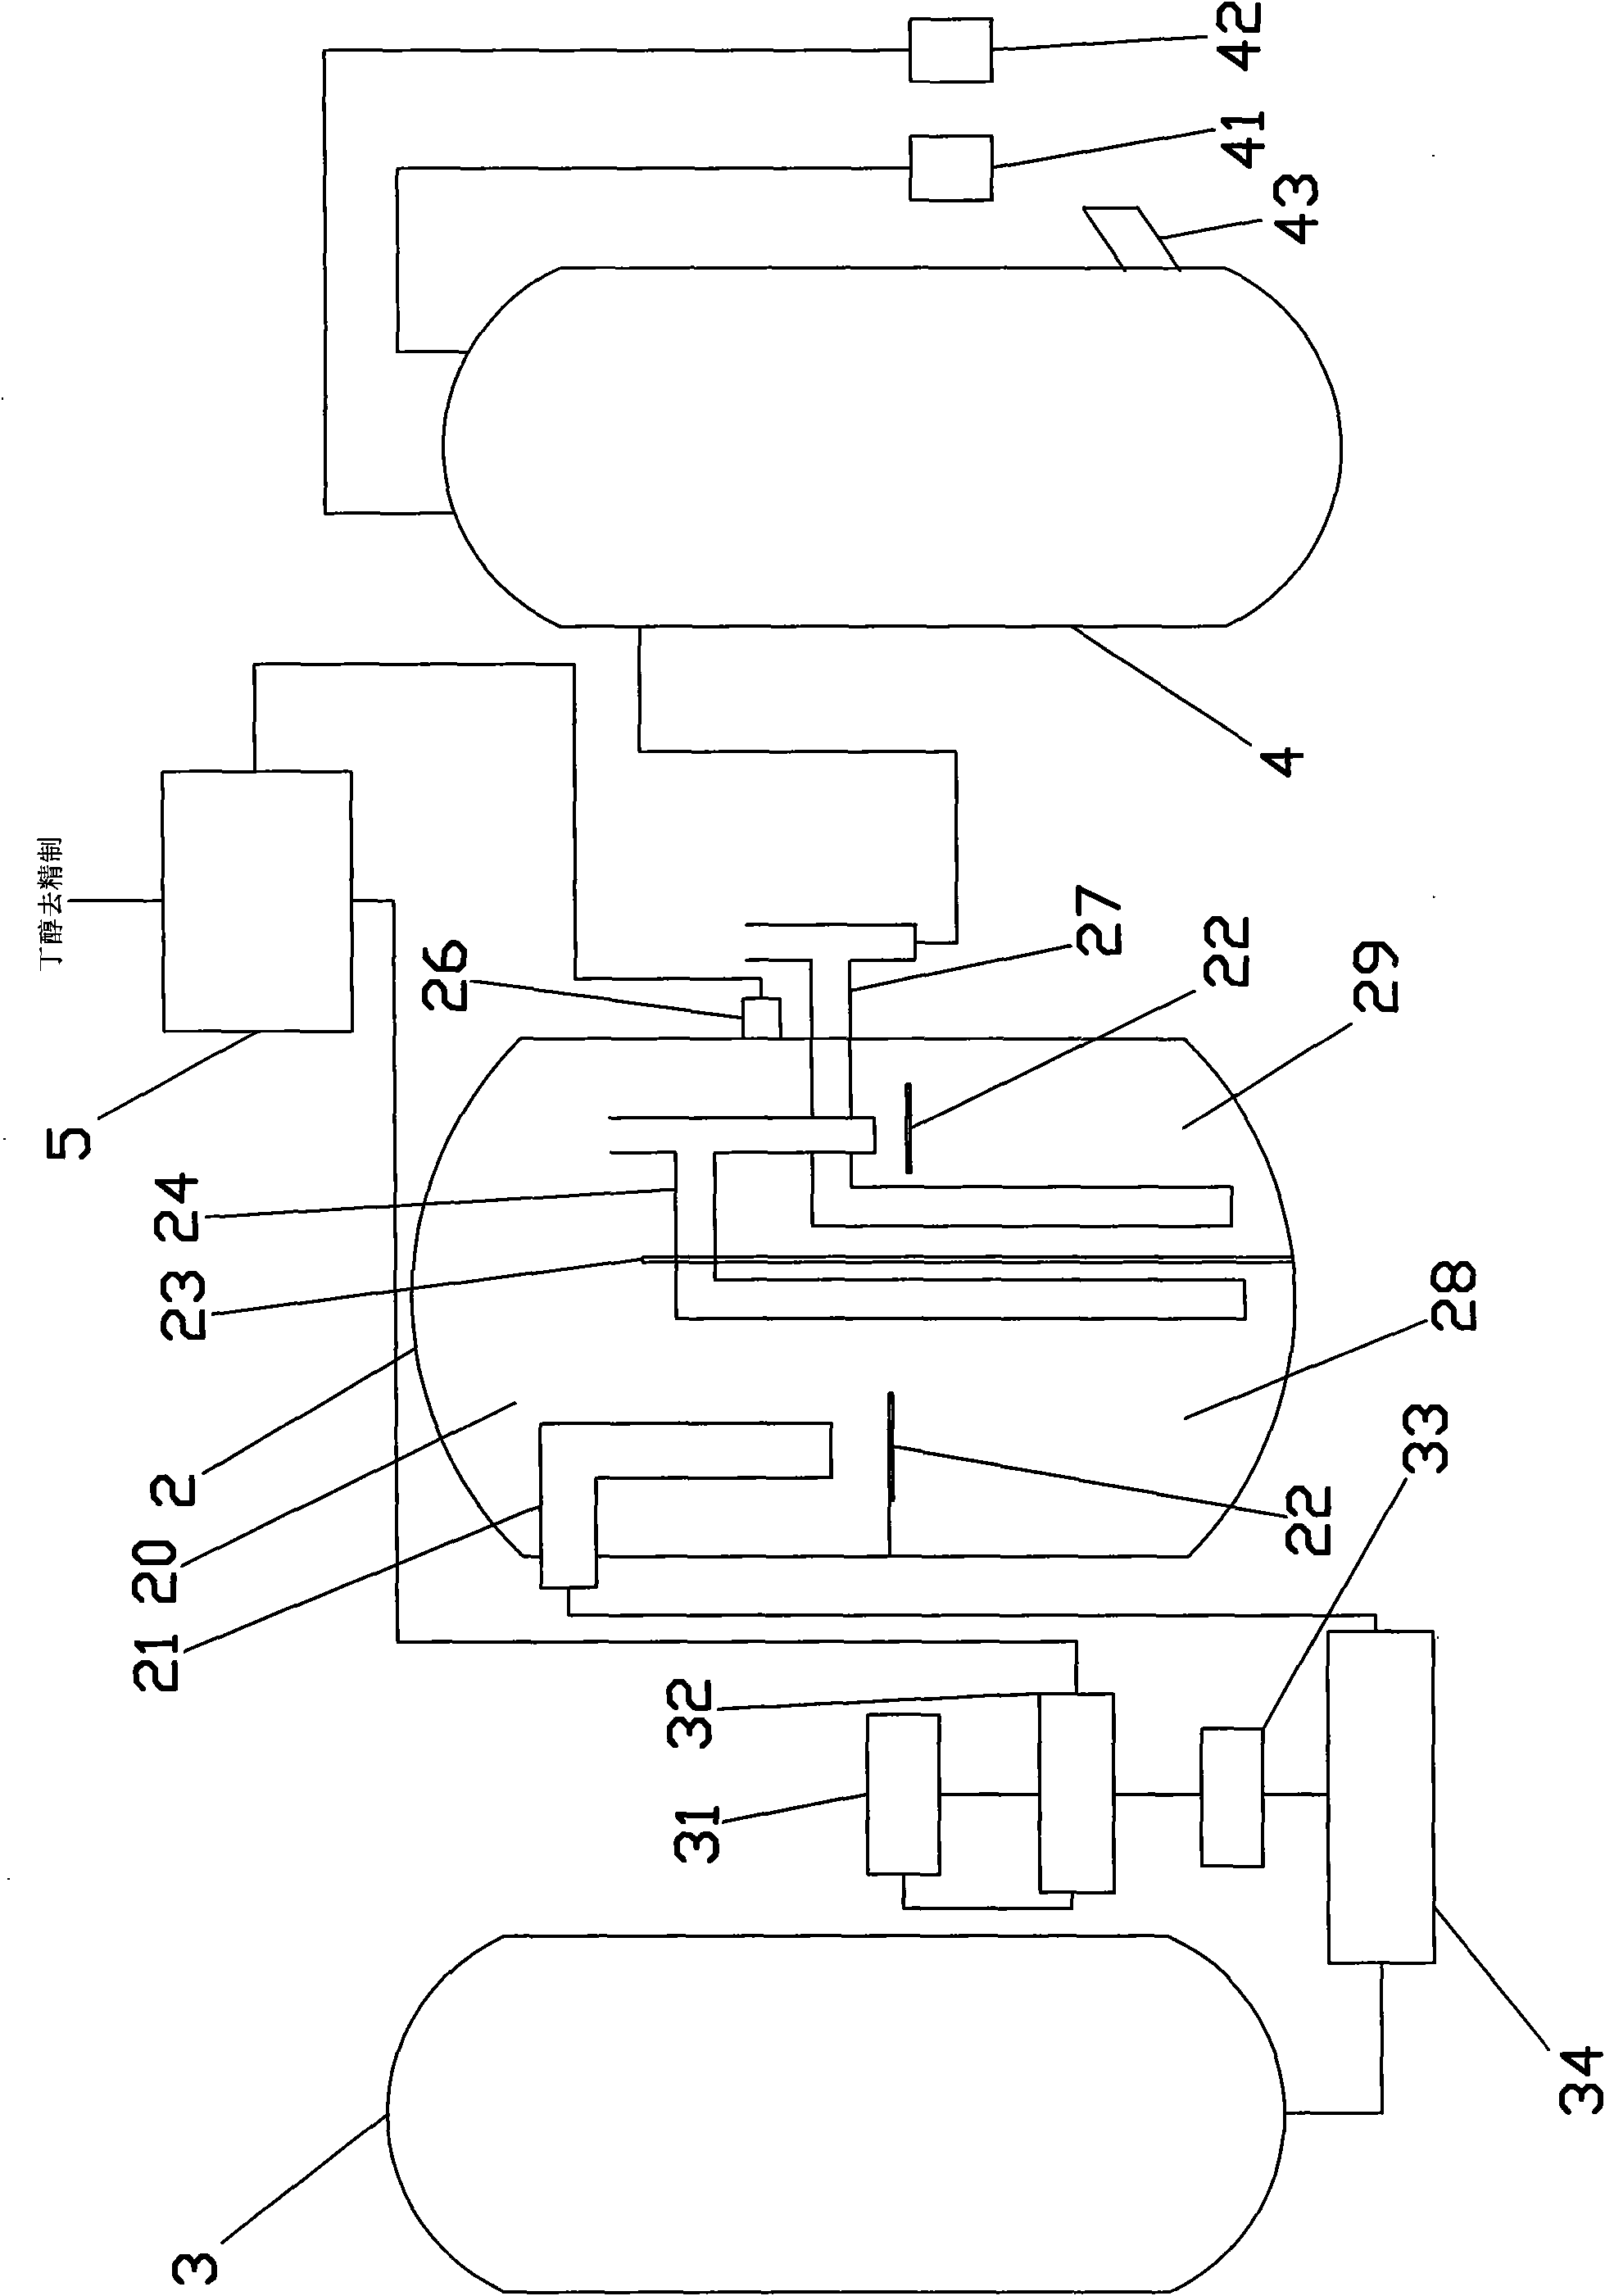 Method and device for producing biological butanol by continuous extraction and fermentation